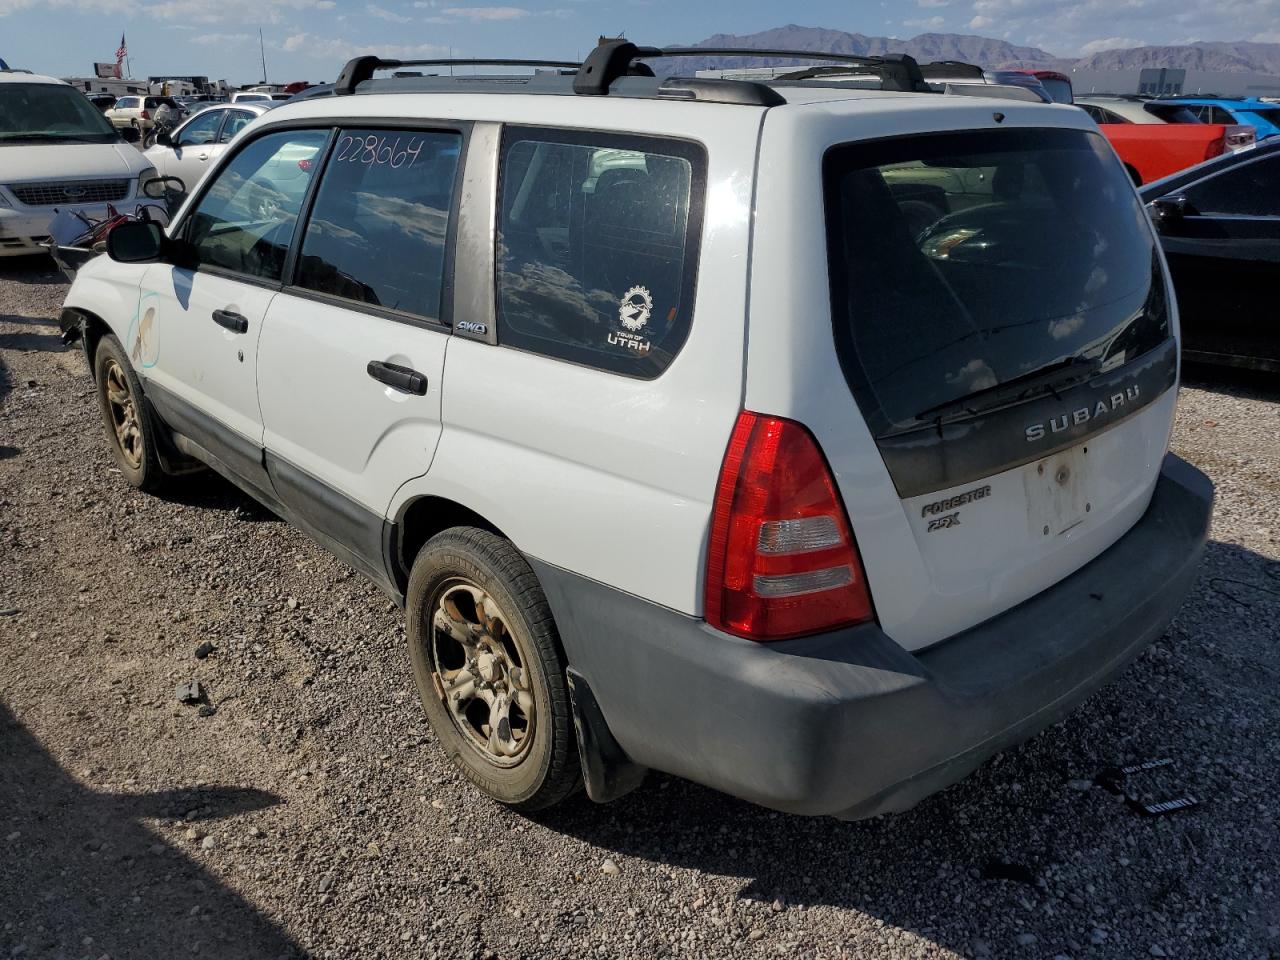 2004 SUBARU FORESTER 2.5X VIN: JF1SG63644H758248